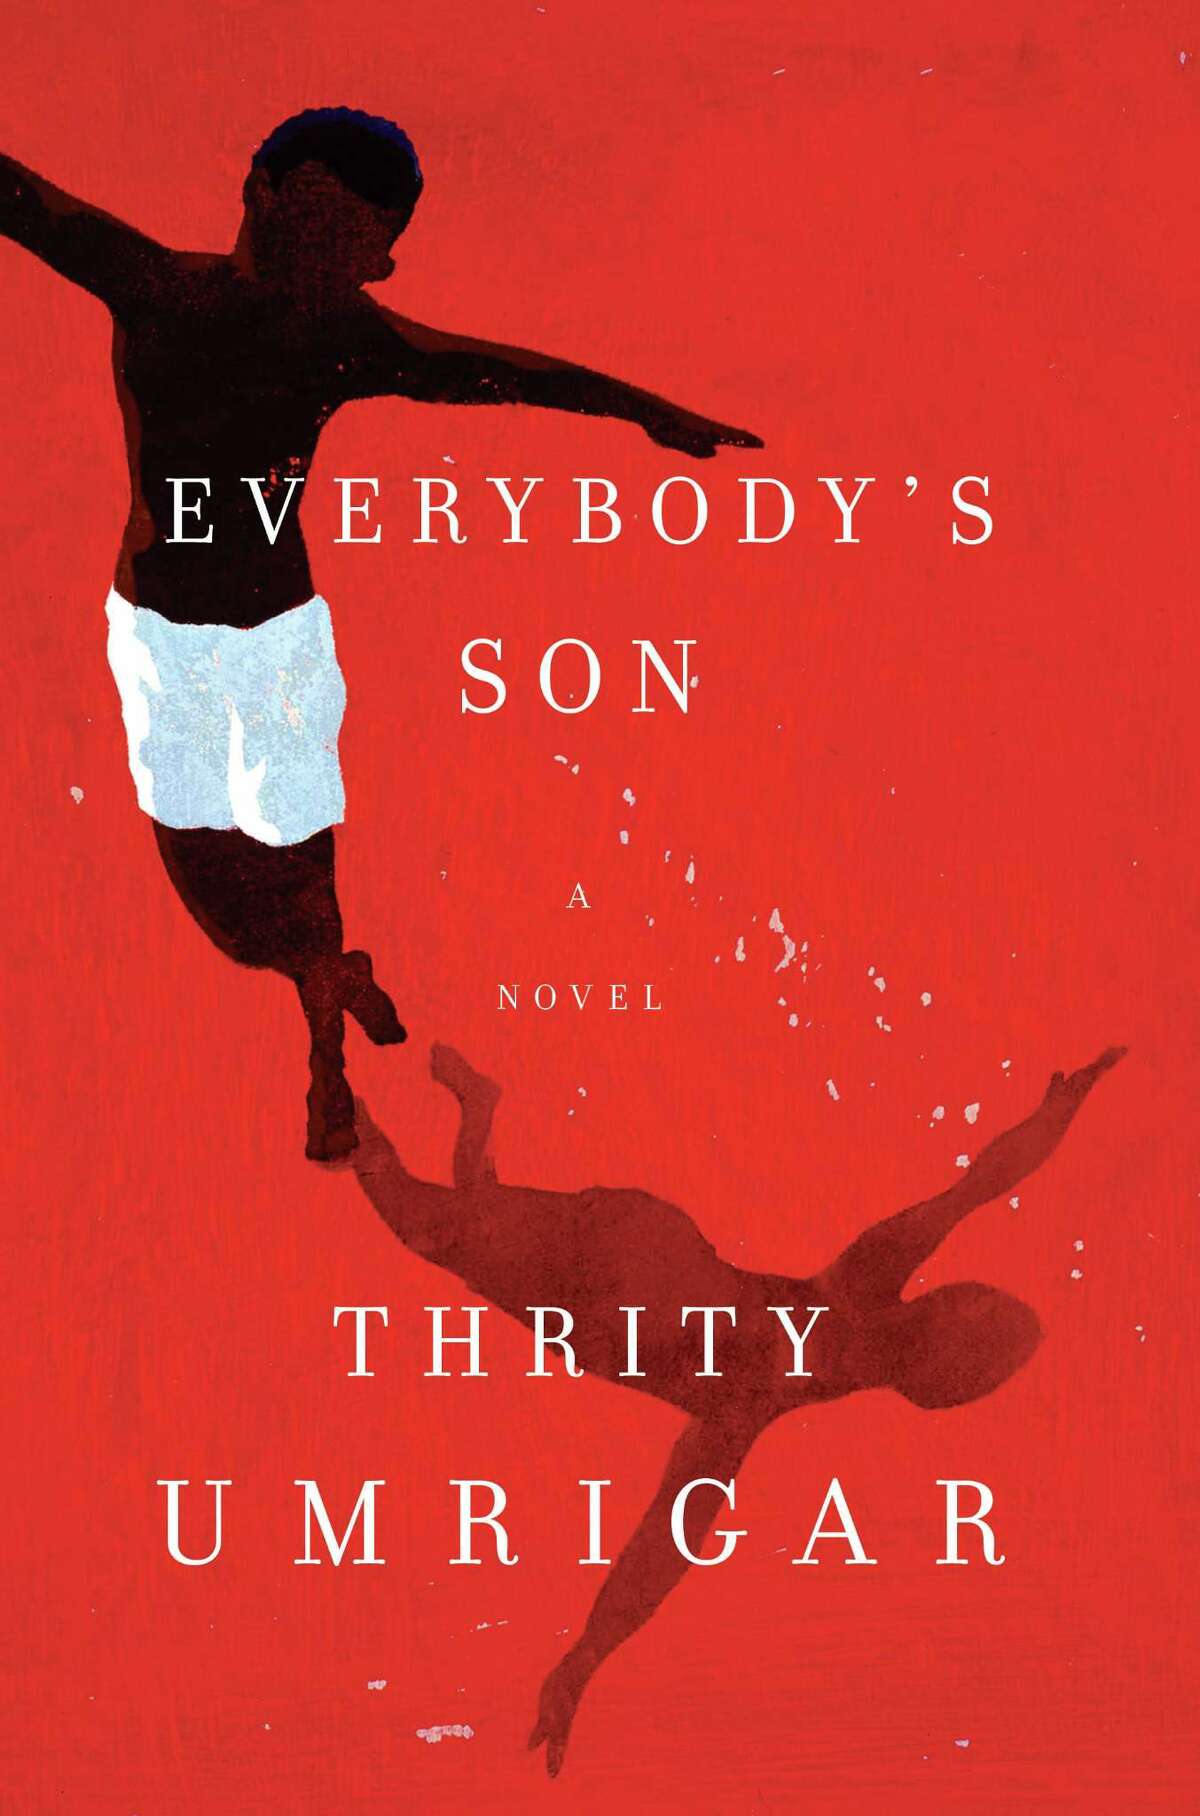 "Everybody's Son" by Thrity Umrigar